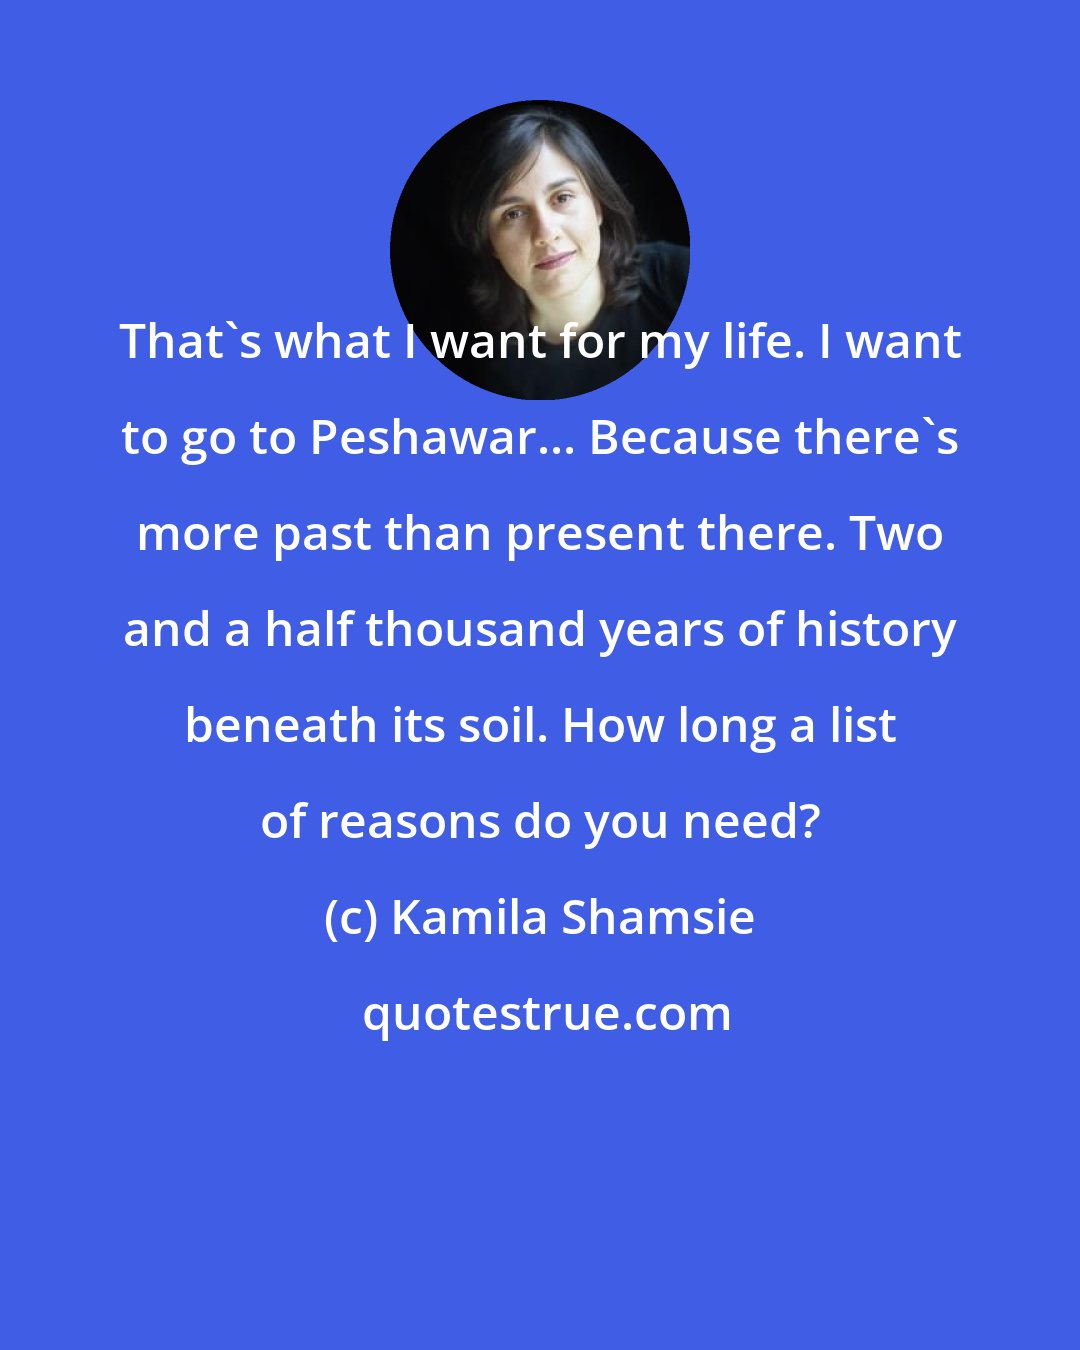 Kamila Shamsie: That's what I want for my life. I want to go to Peshawar... Because there's more past than present there. Two and a half thousand years of history beneath its soil. How long a list of reasons do you need?